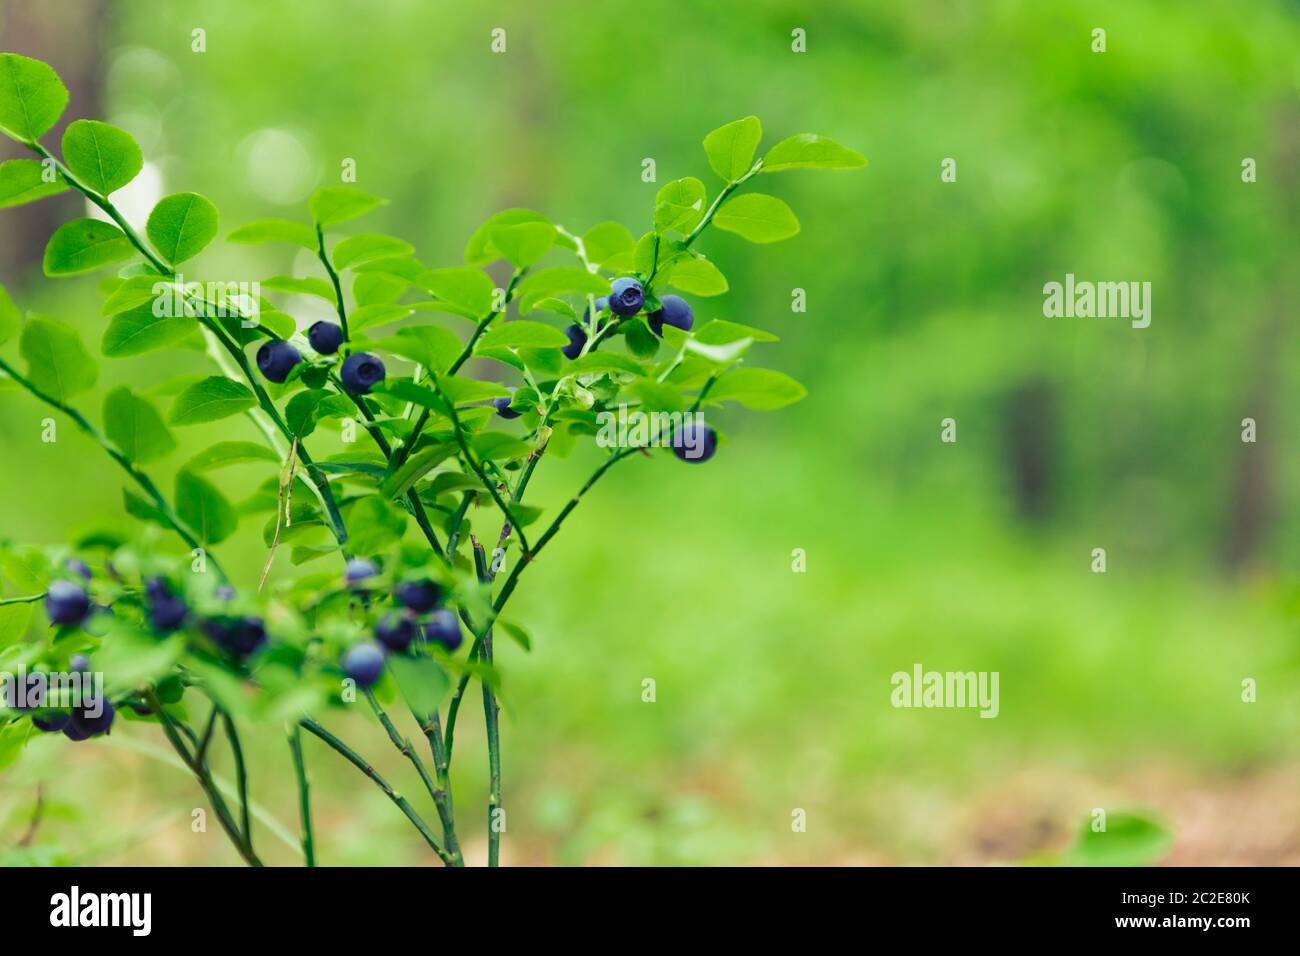 Shrubs with blueberry fruits in the forest Stock Photo